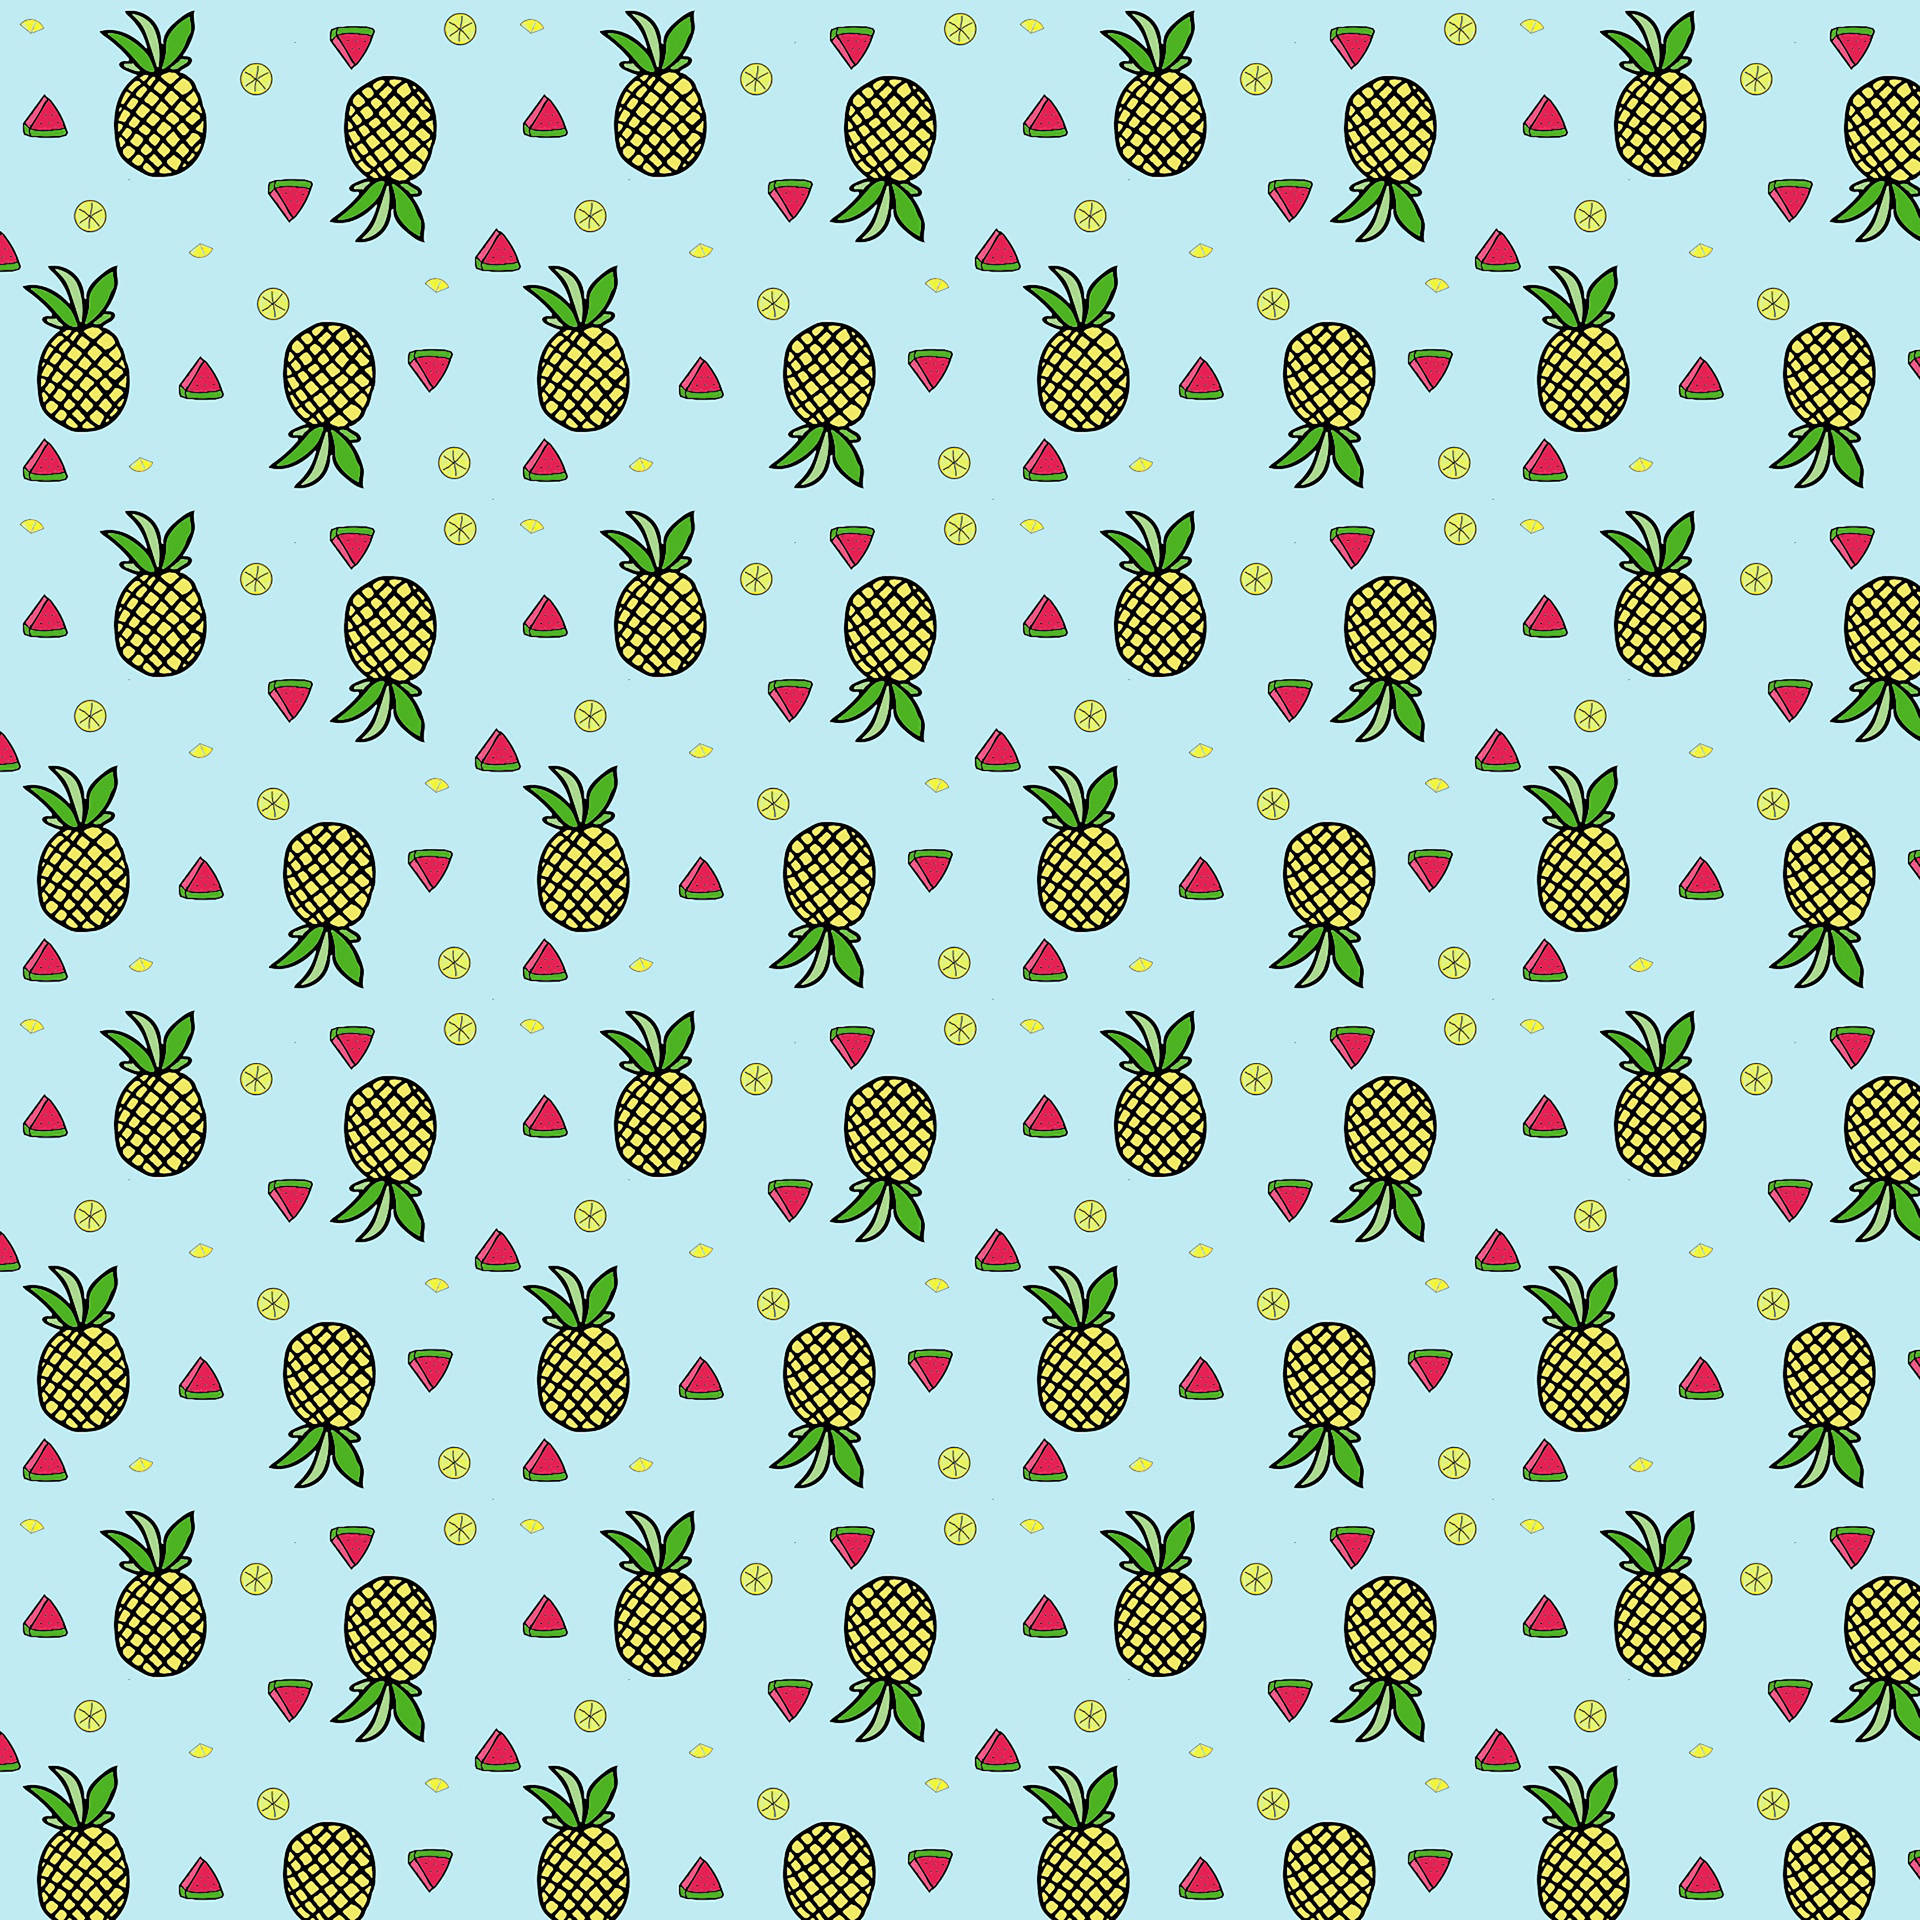 Refreshing Pineapple And Fruits Pattern Background